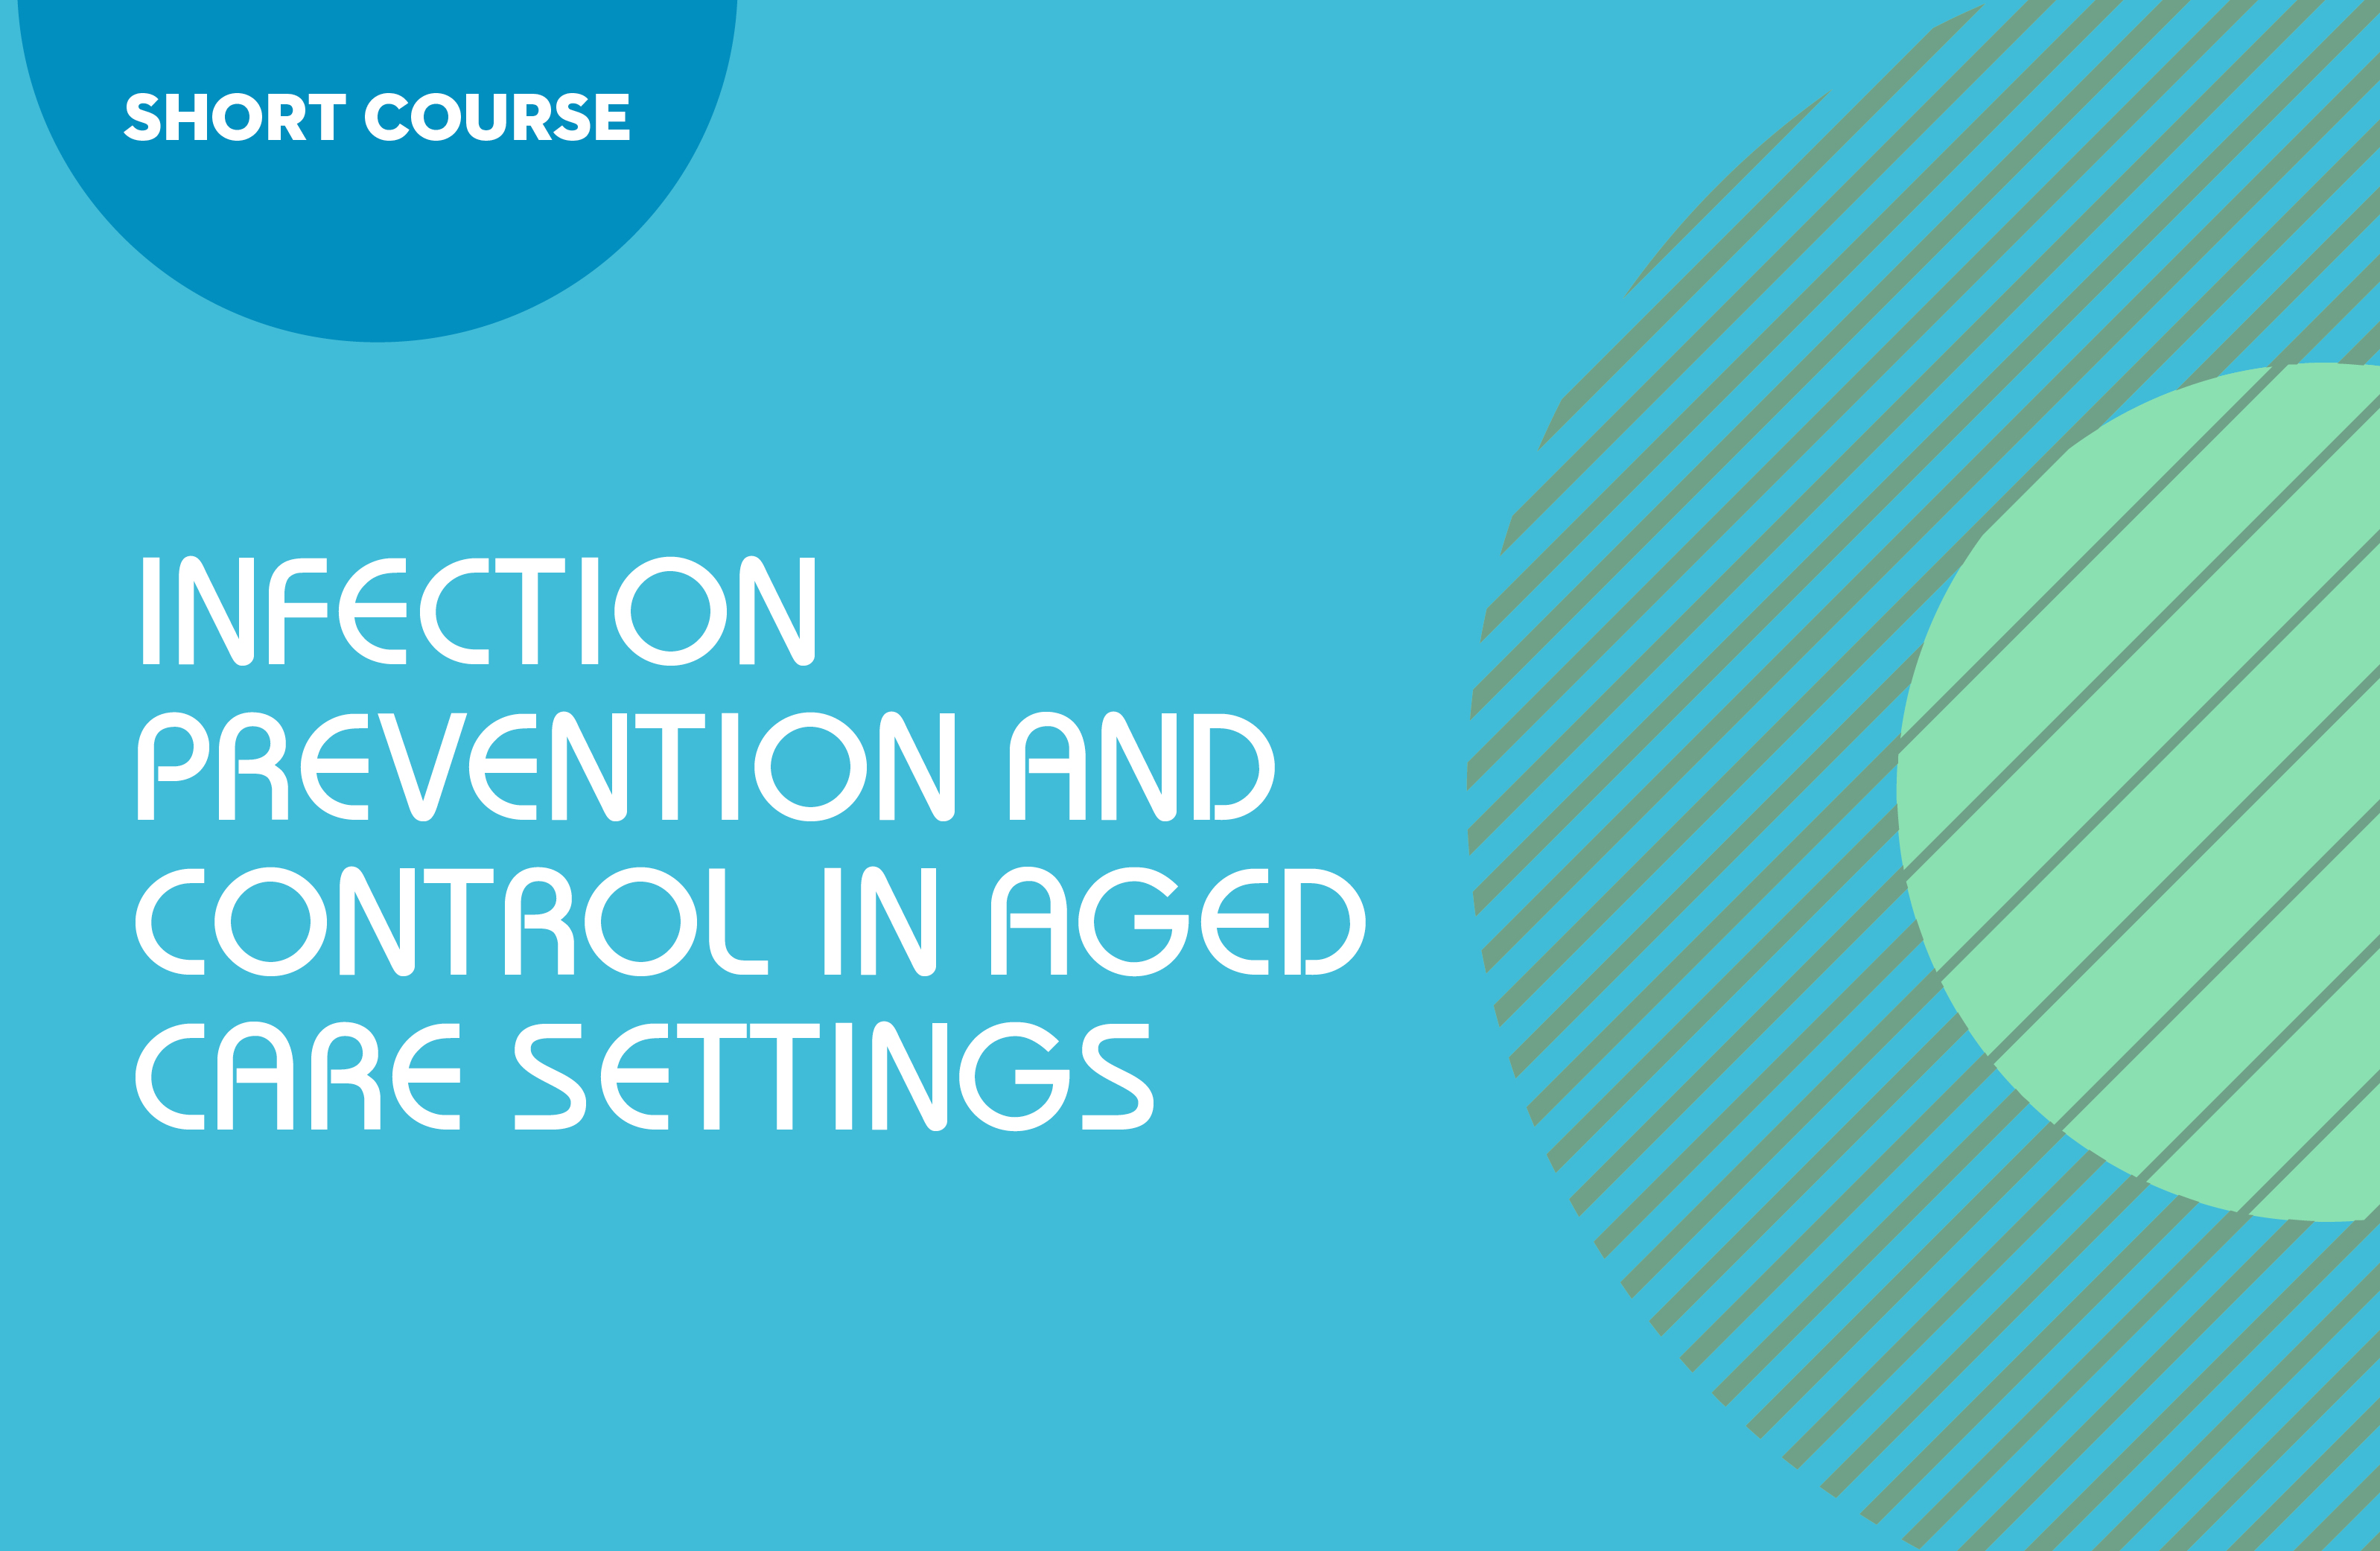 Short Course in Infection Prevention and Control in Aged Care